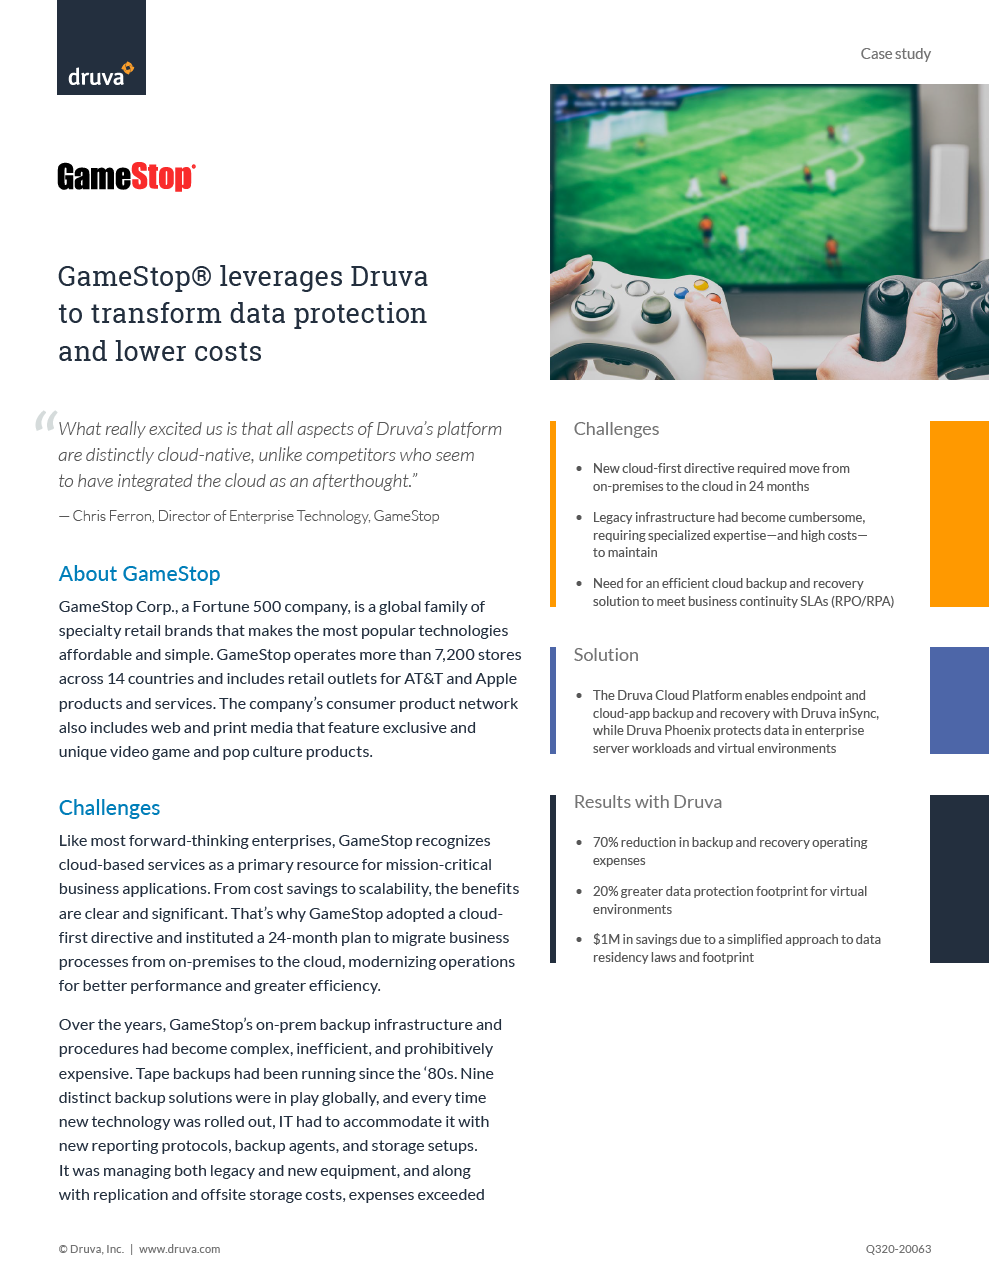 GameStop® leverages Druva to transform data protection and lower costs